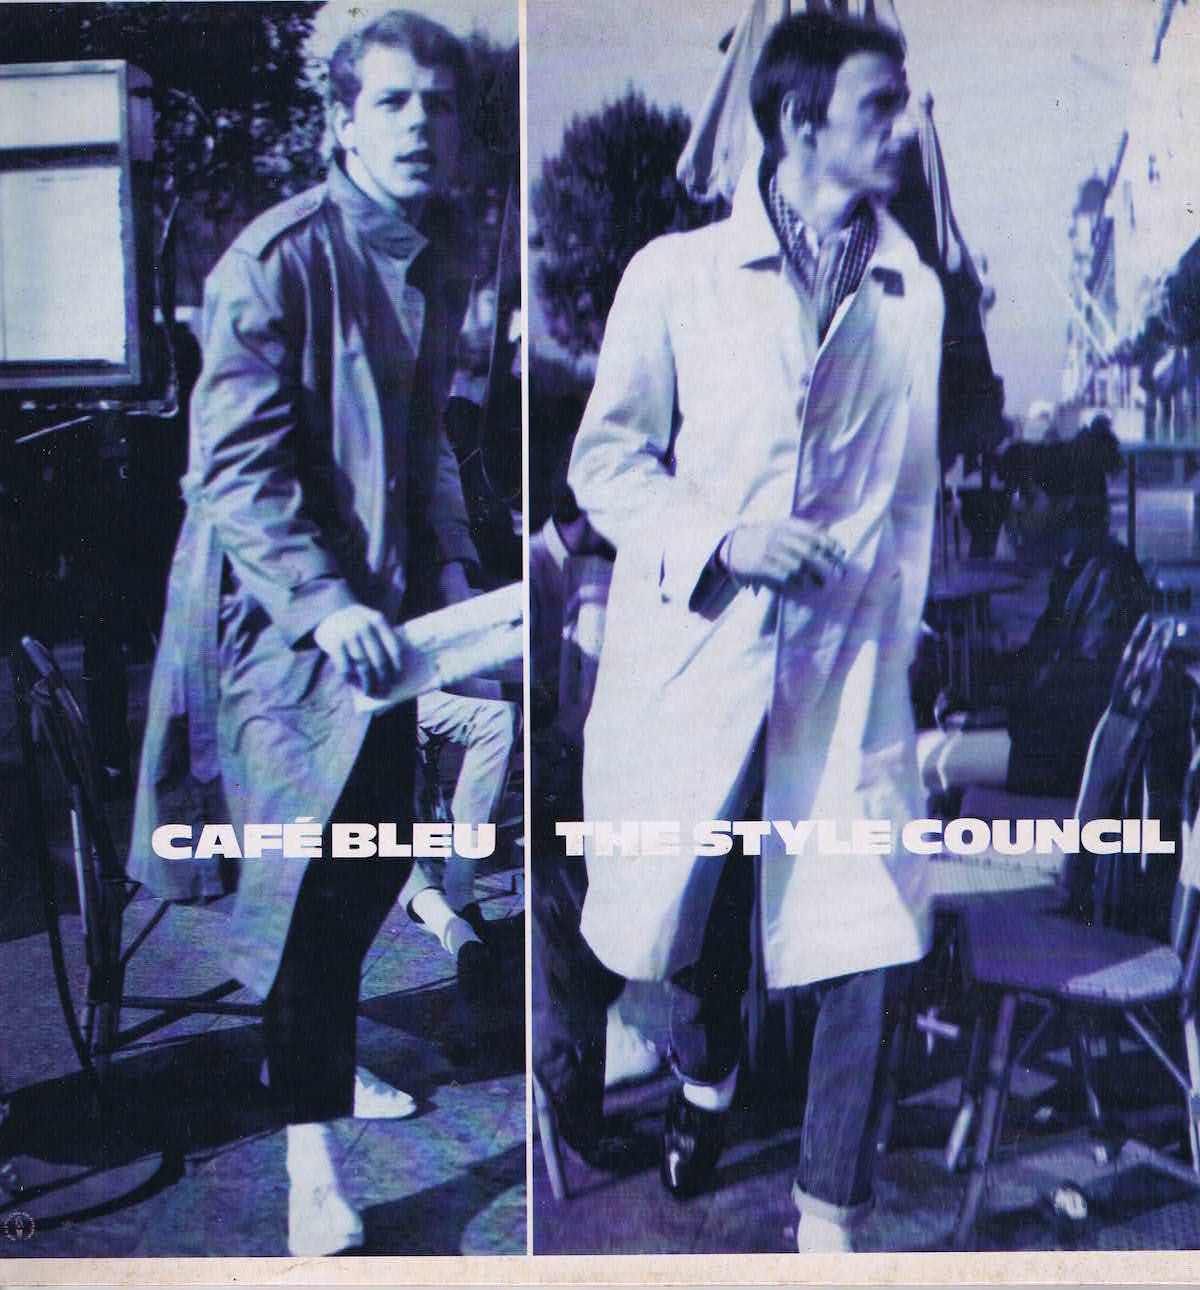 Cafe Bleu album cover by The Style Council